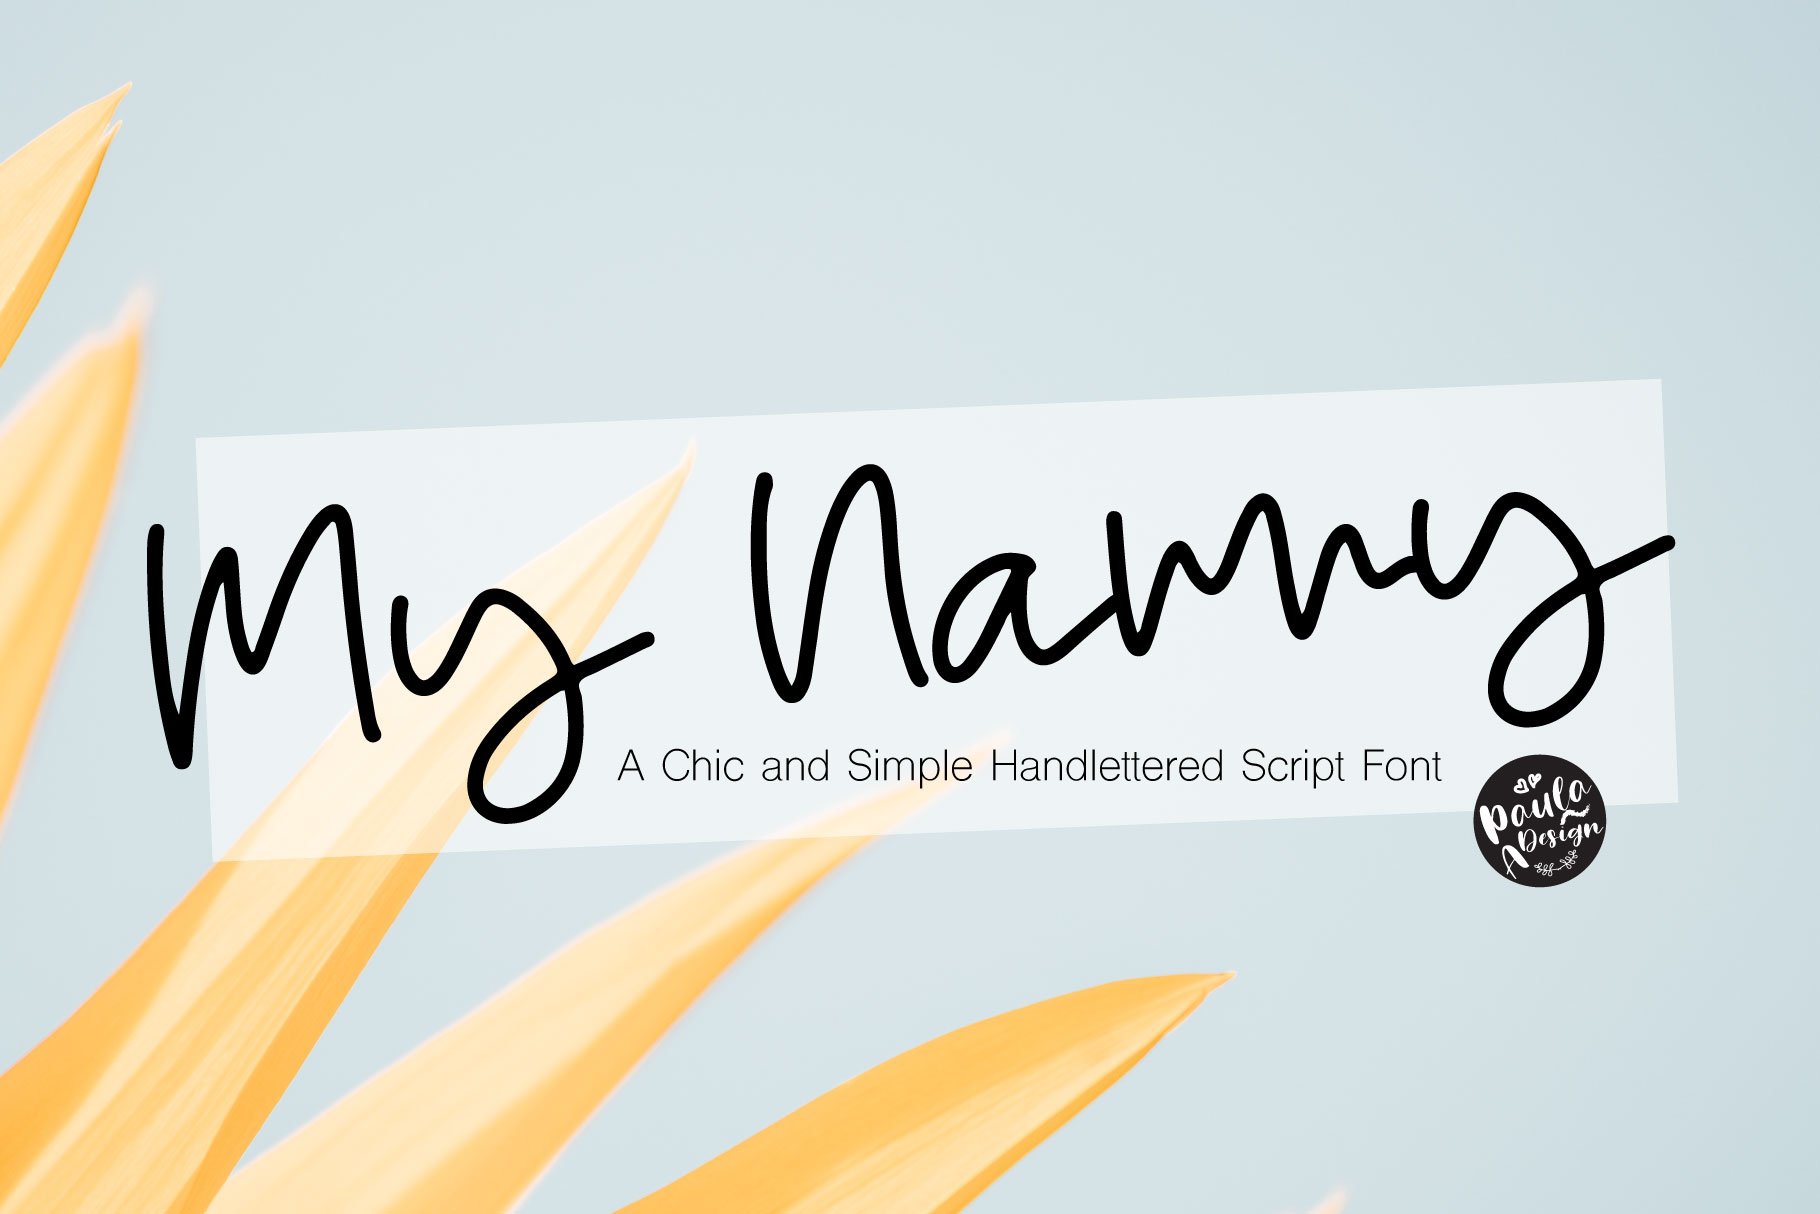 My Nanny | Chic Script Font cover image.